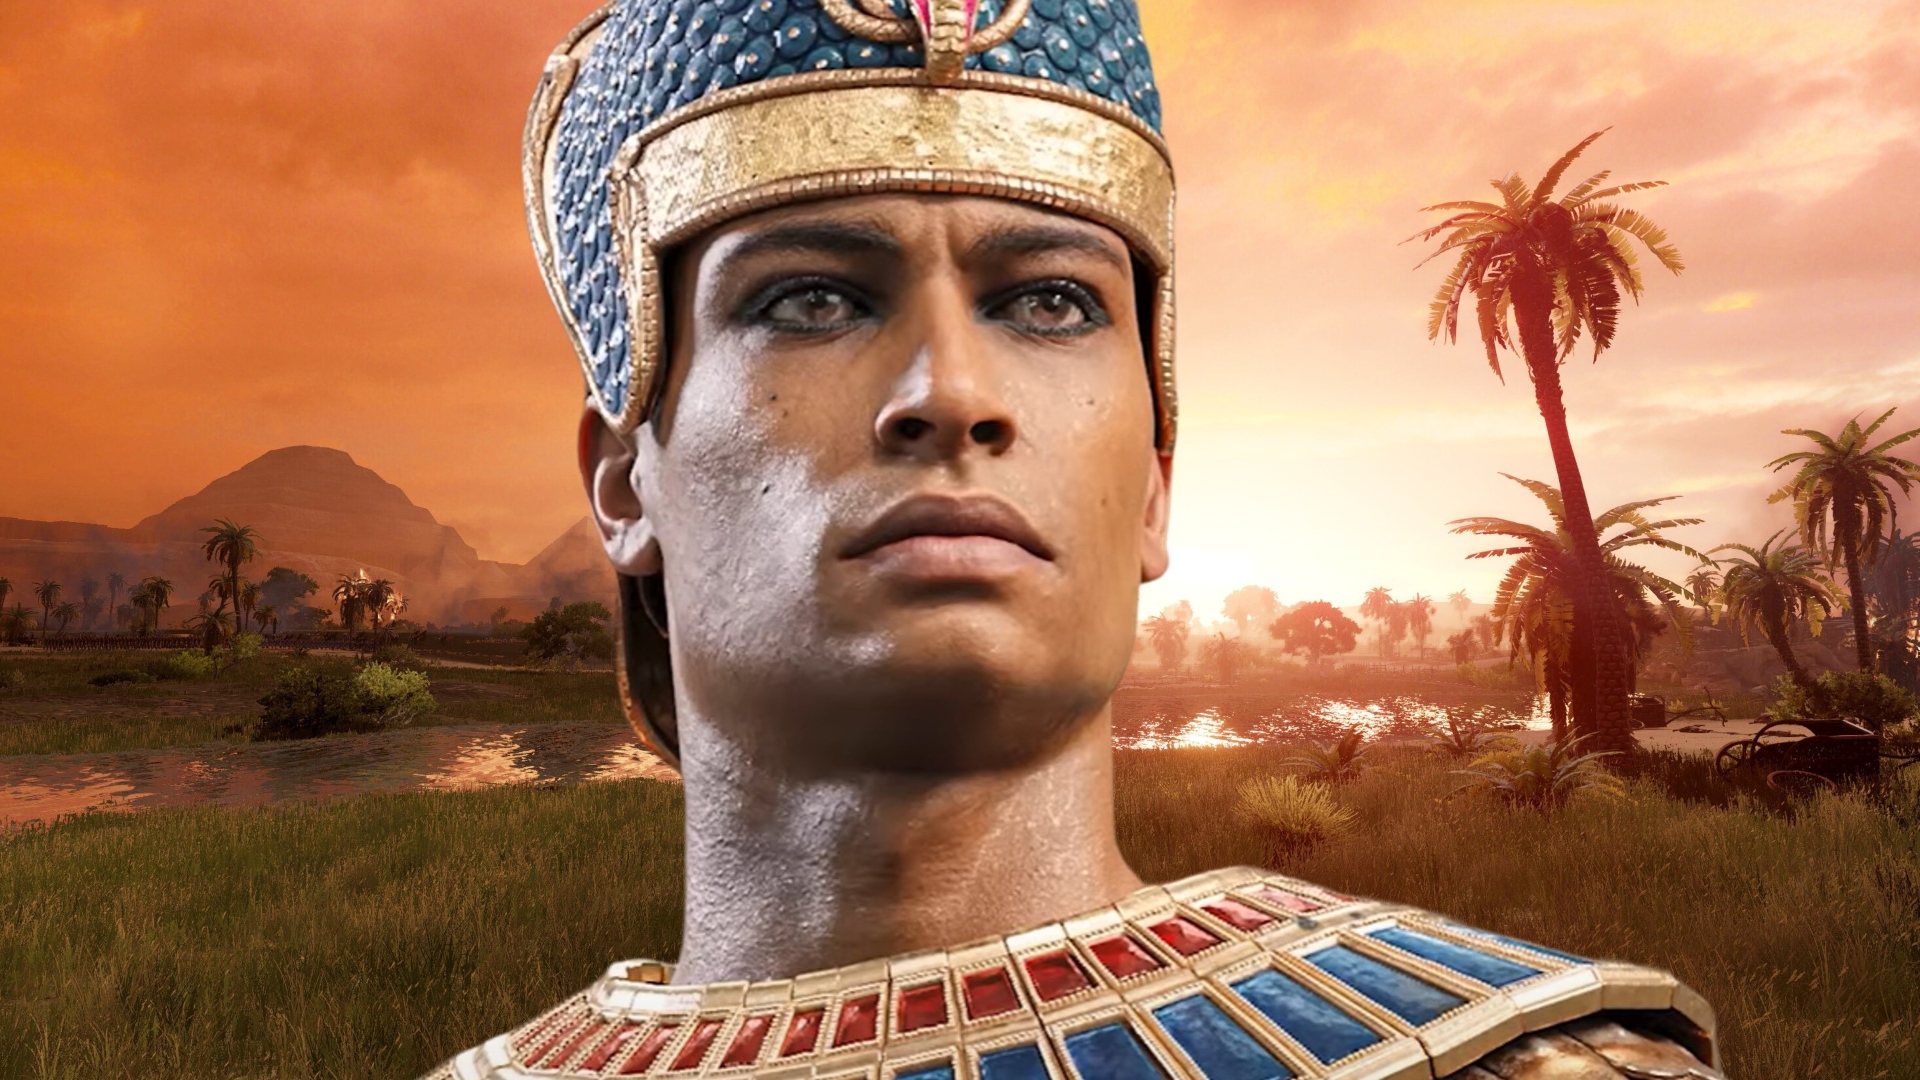 Total War Pharaoh's terrain system is a nightmare – but in a good way